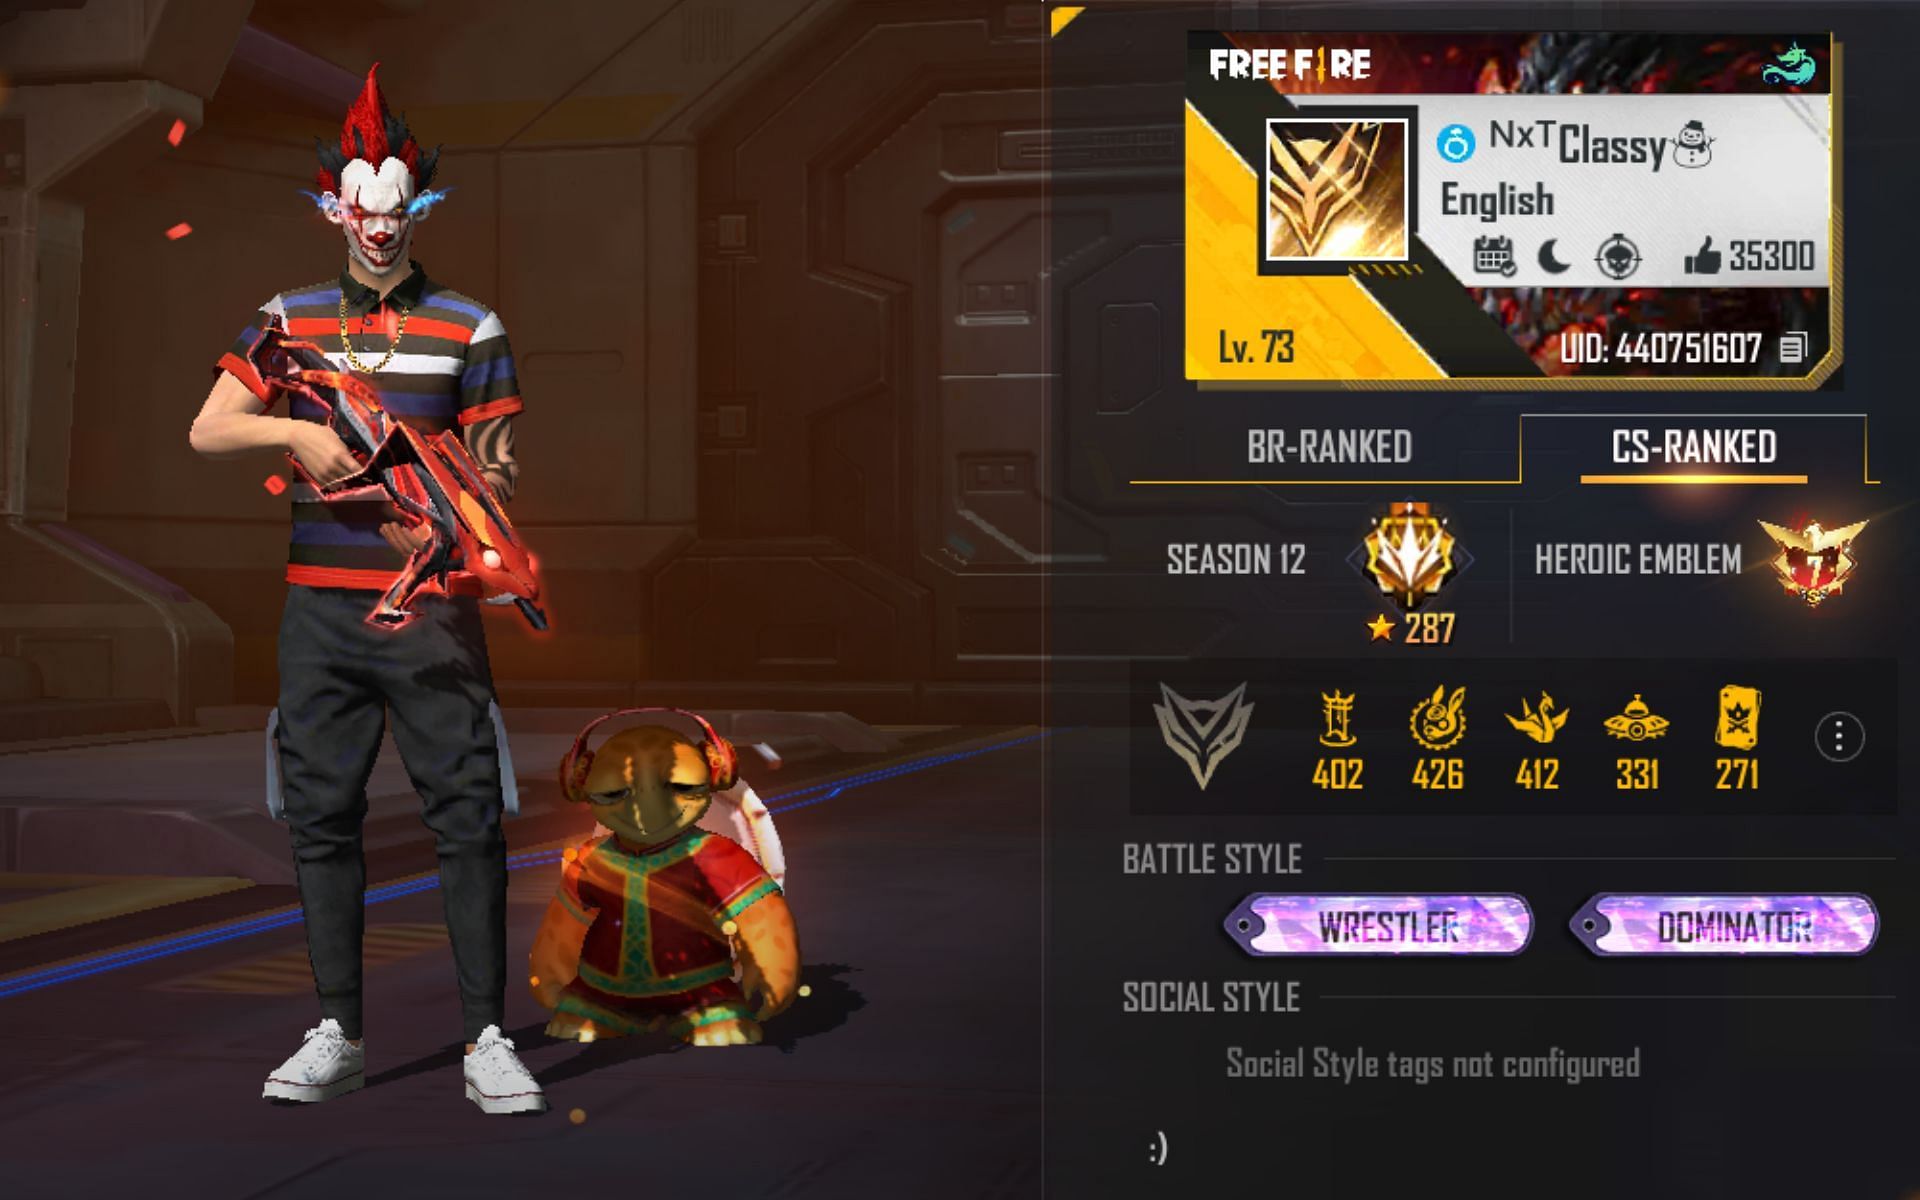 Grand Master for the first in CSR : r/freefire